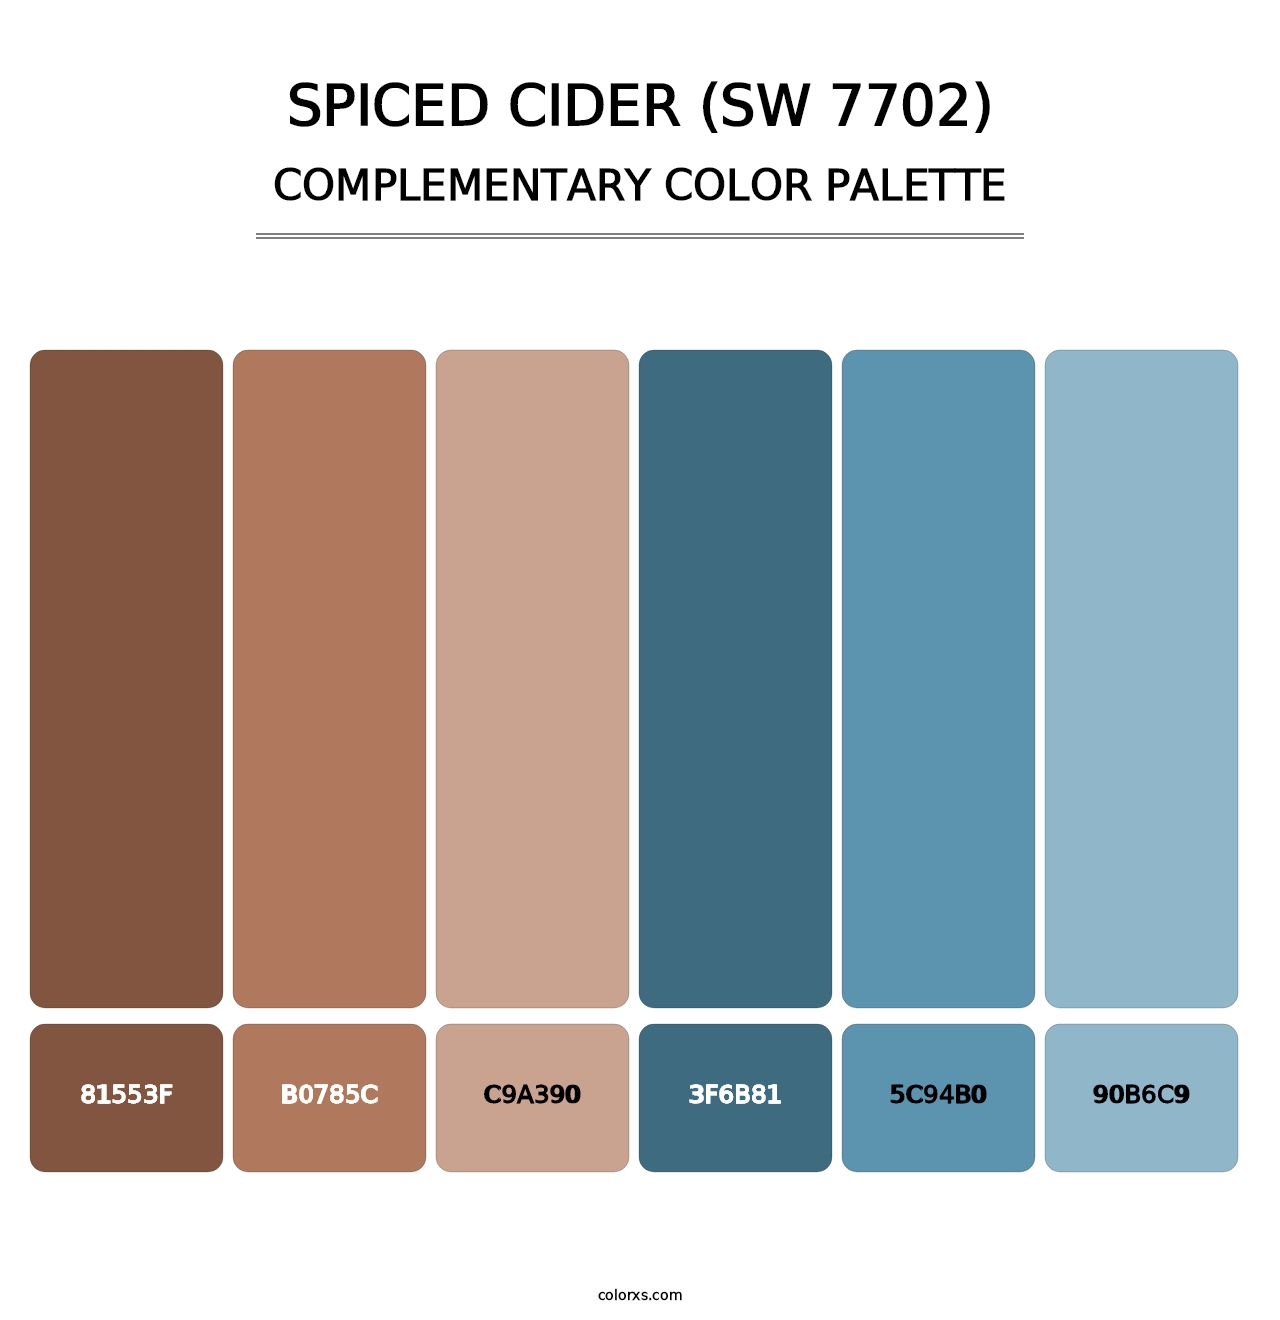 Spiced Cider (SW 7702) - Complementary Color Palette